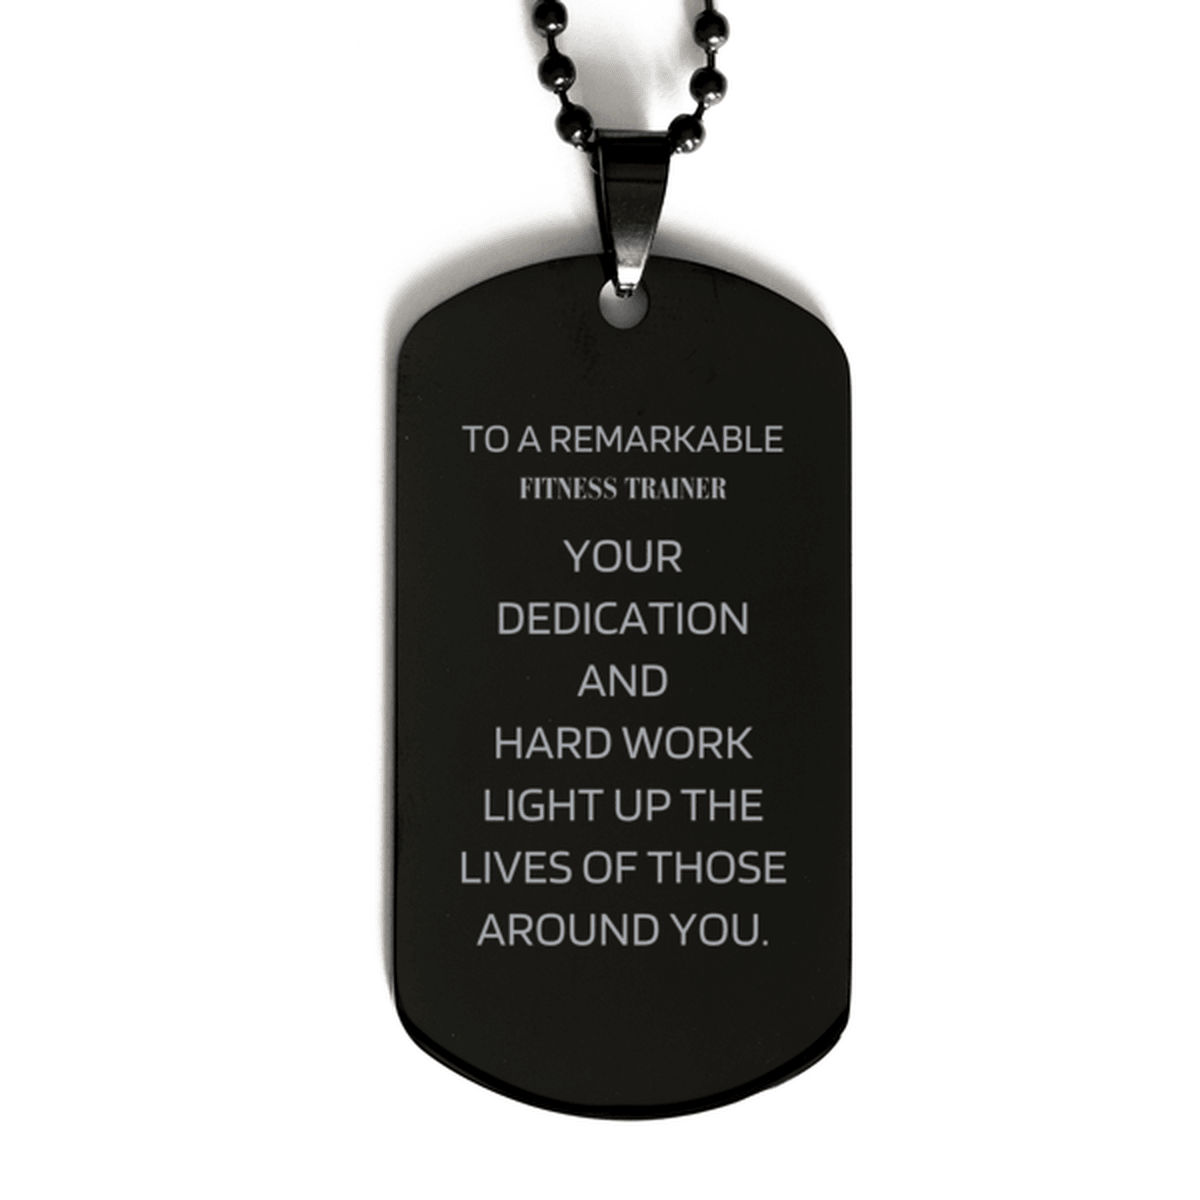 Remarkable Fitness Trainer Gifts, Your dedication and hard work, Inspirational Birthday Christmas Unique Black Dog Tag For Fitness Trainer, Coworkers, Men, Women, Friends - Mallard Moon Gift Shop